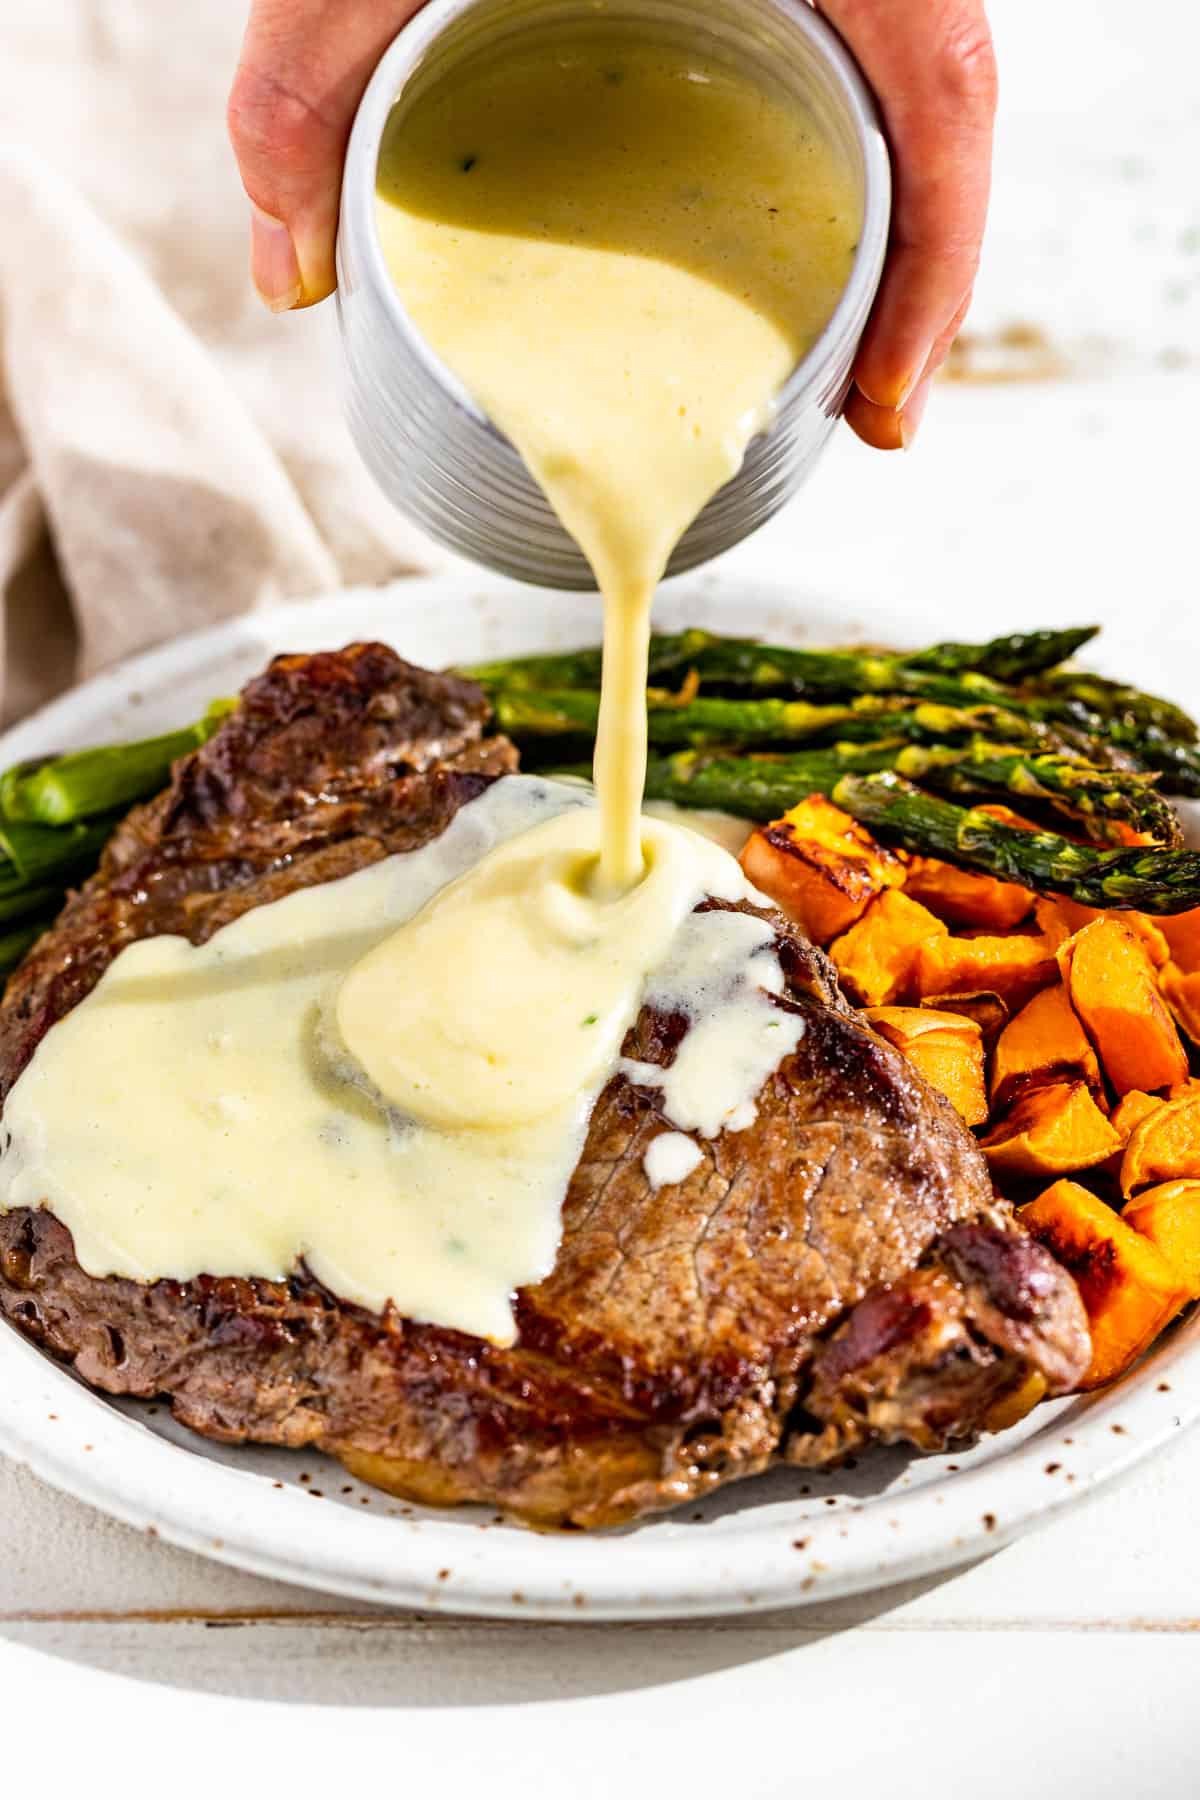 Drizzling the garlic parmesan cream sauce over a steak with roasted cubed sweet potatoes and asparagus on the side.